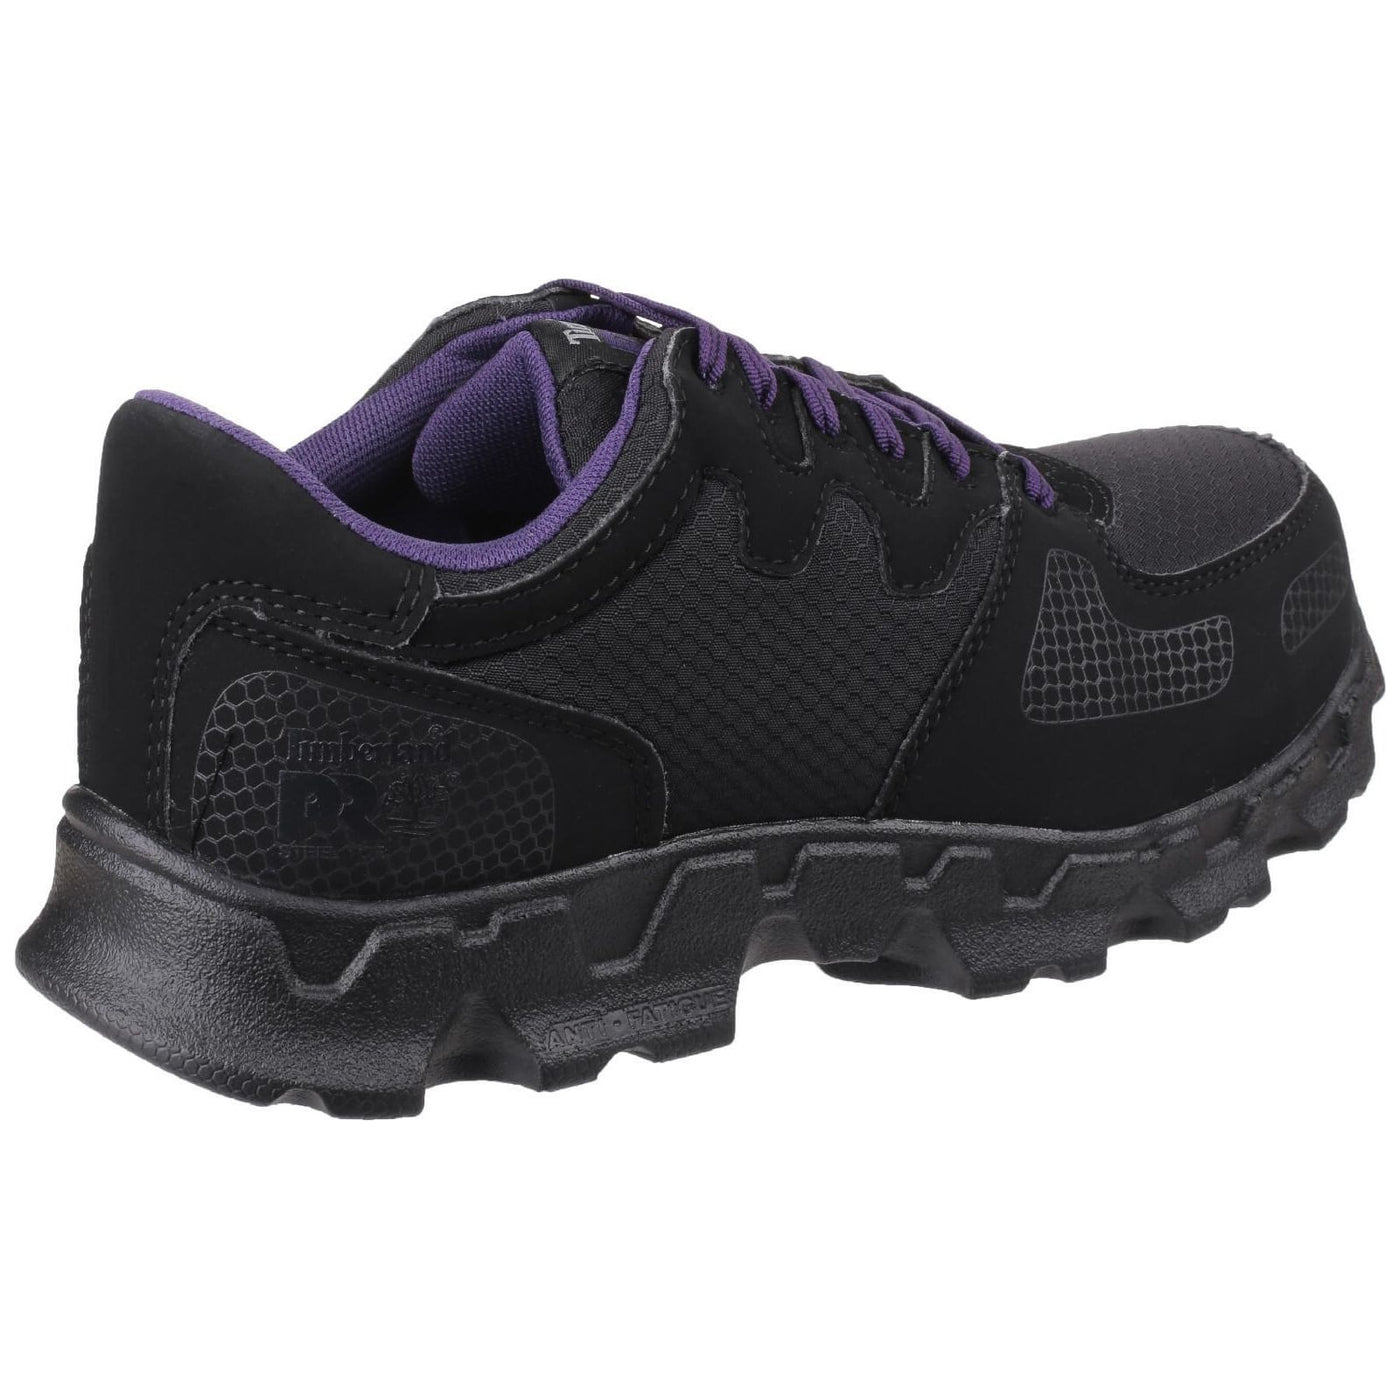 Timberland Powertrain Safety Shoes - Womens - Sale